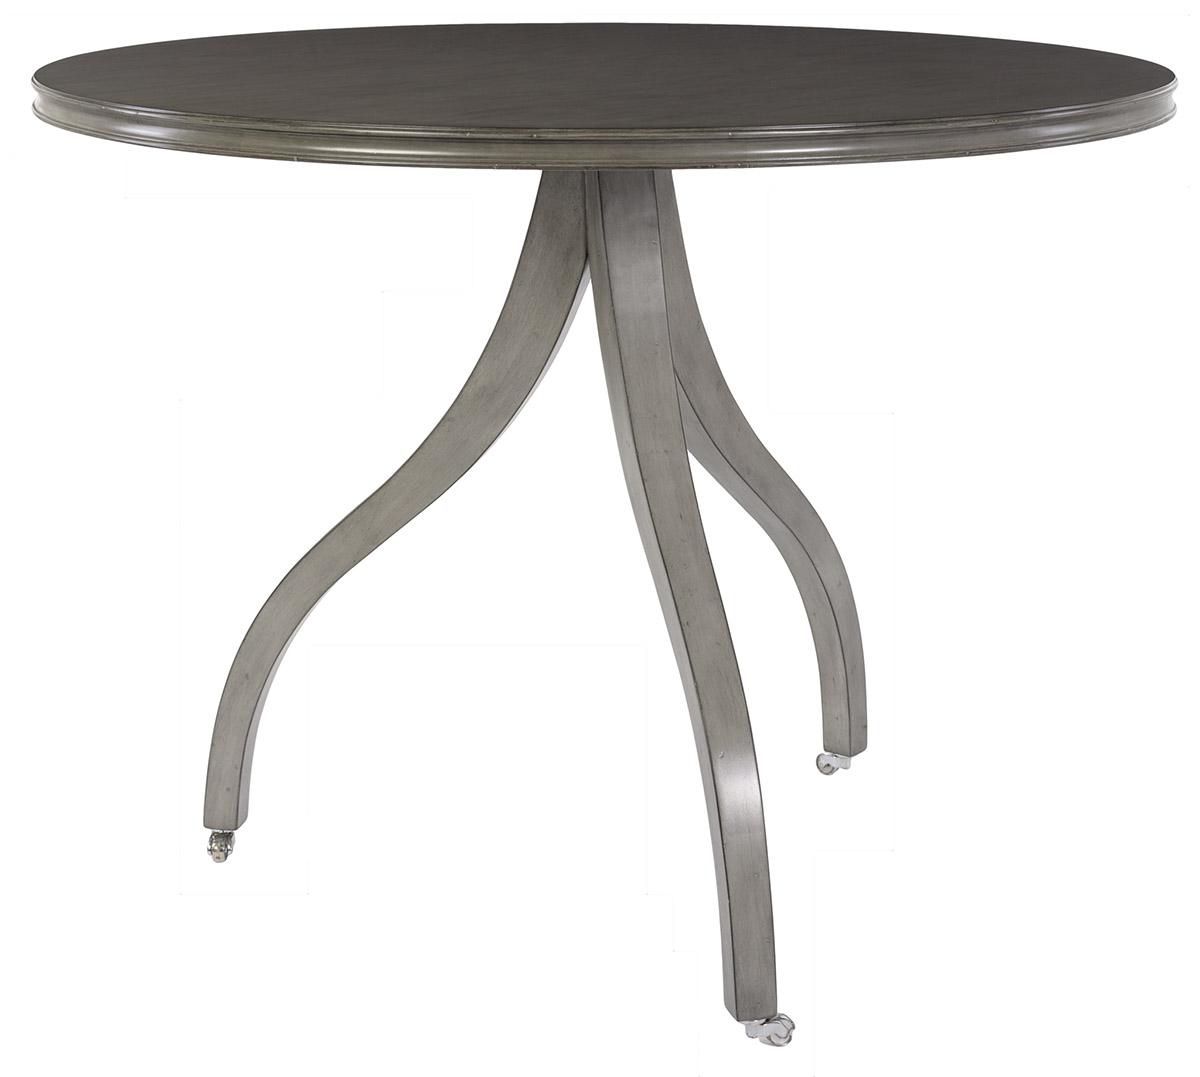 Trendy Cosmopolitan Tripod Pedestal Round Dining Table – Safavieh In Distressed Grey Finish Wood Classic Design Dining Tables (View 20 of 25)